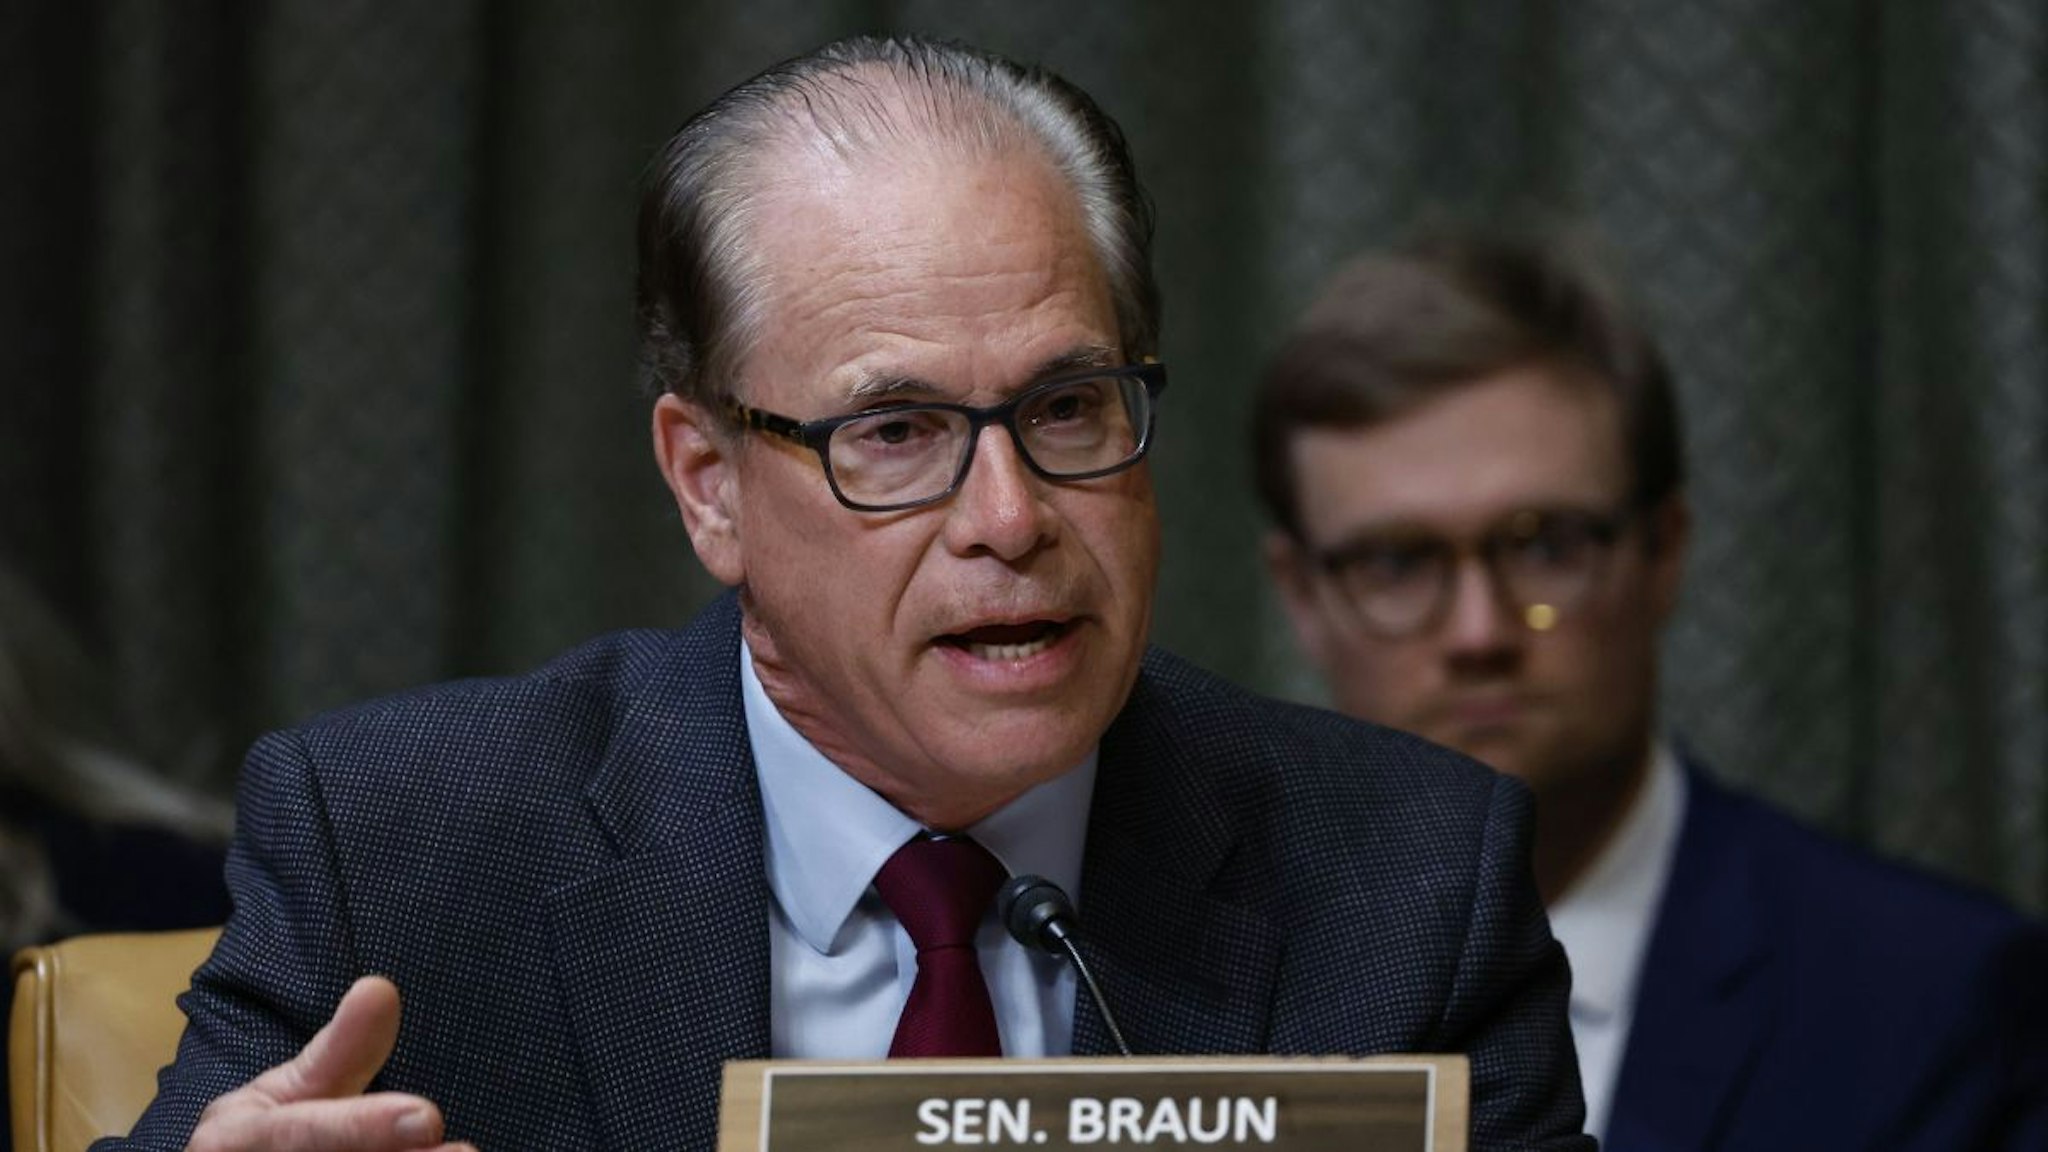 Senator Mike Braun, a Republican from Indiana, speaks during a Senate Appropriations Subcommittee hearing in Washington, D.C., US, on Wednesday, May 25, 2022.